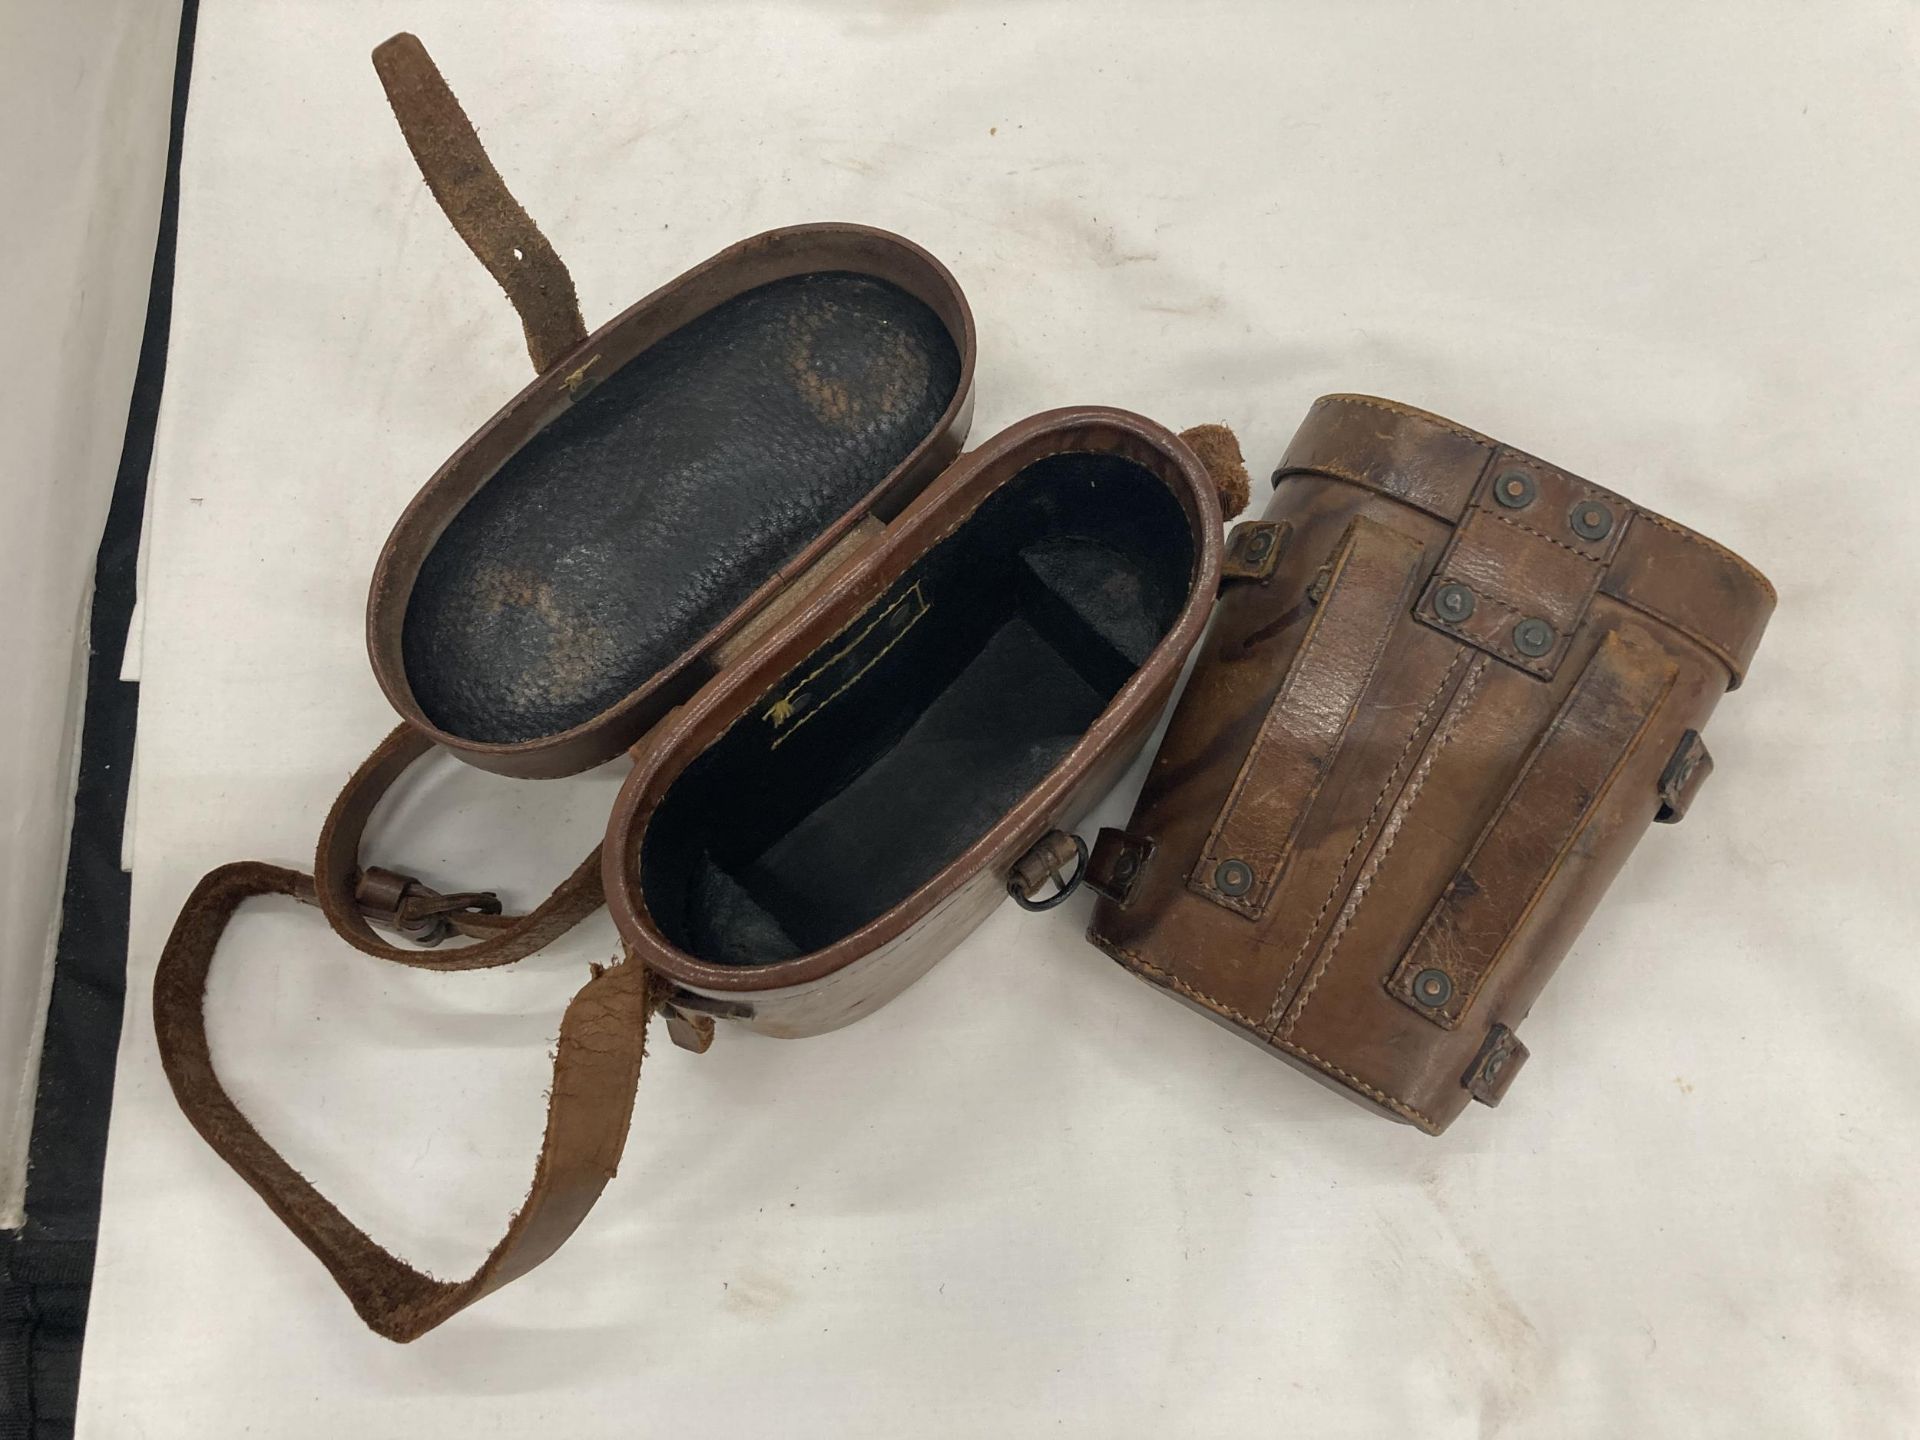 A PAIR OF BINOCULARS IN A LEATHER CASE 'PRISMATIC NO 3 MK 1' BY AITCHISON & CO LTD 1918, PLUS A ROSS - Image 2 of 2